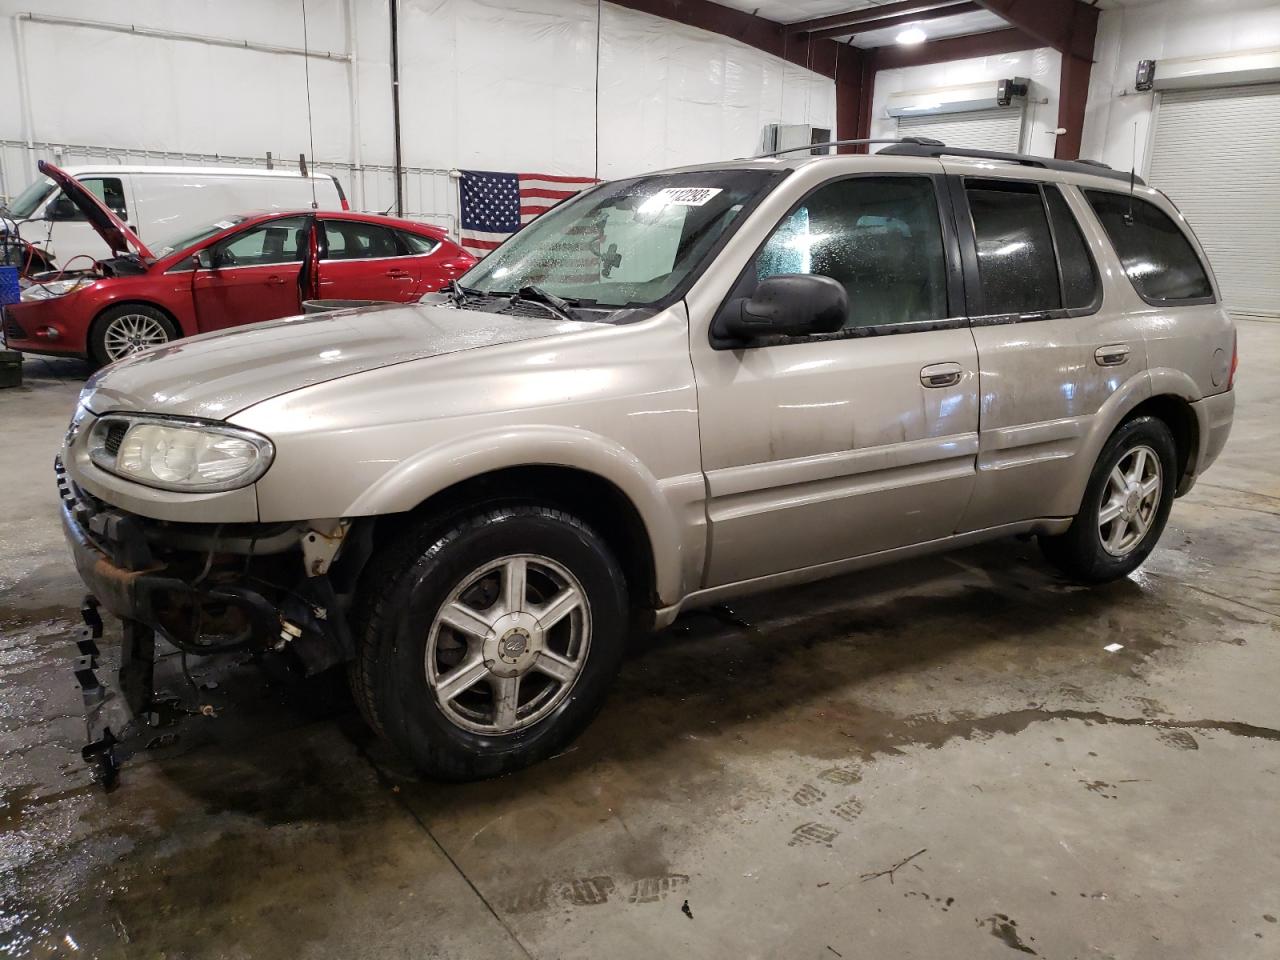 2002 Oldsmobile Bravada for sale at Copart Avon, MN Lot #41112*** |  SalvageReseller.com